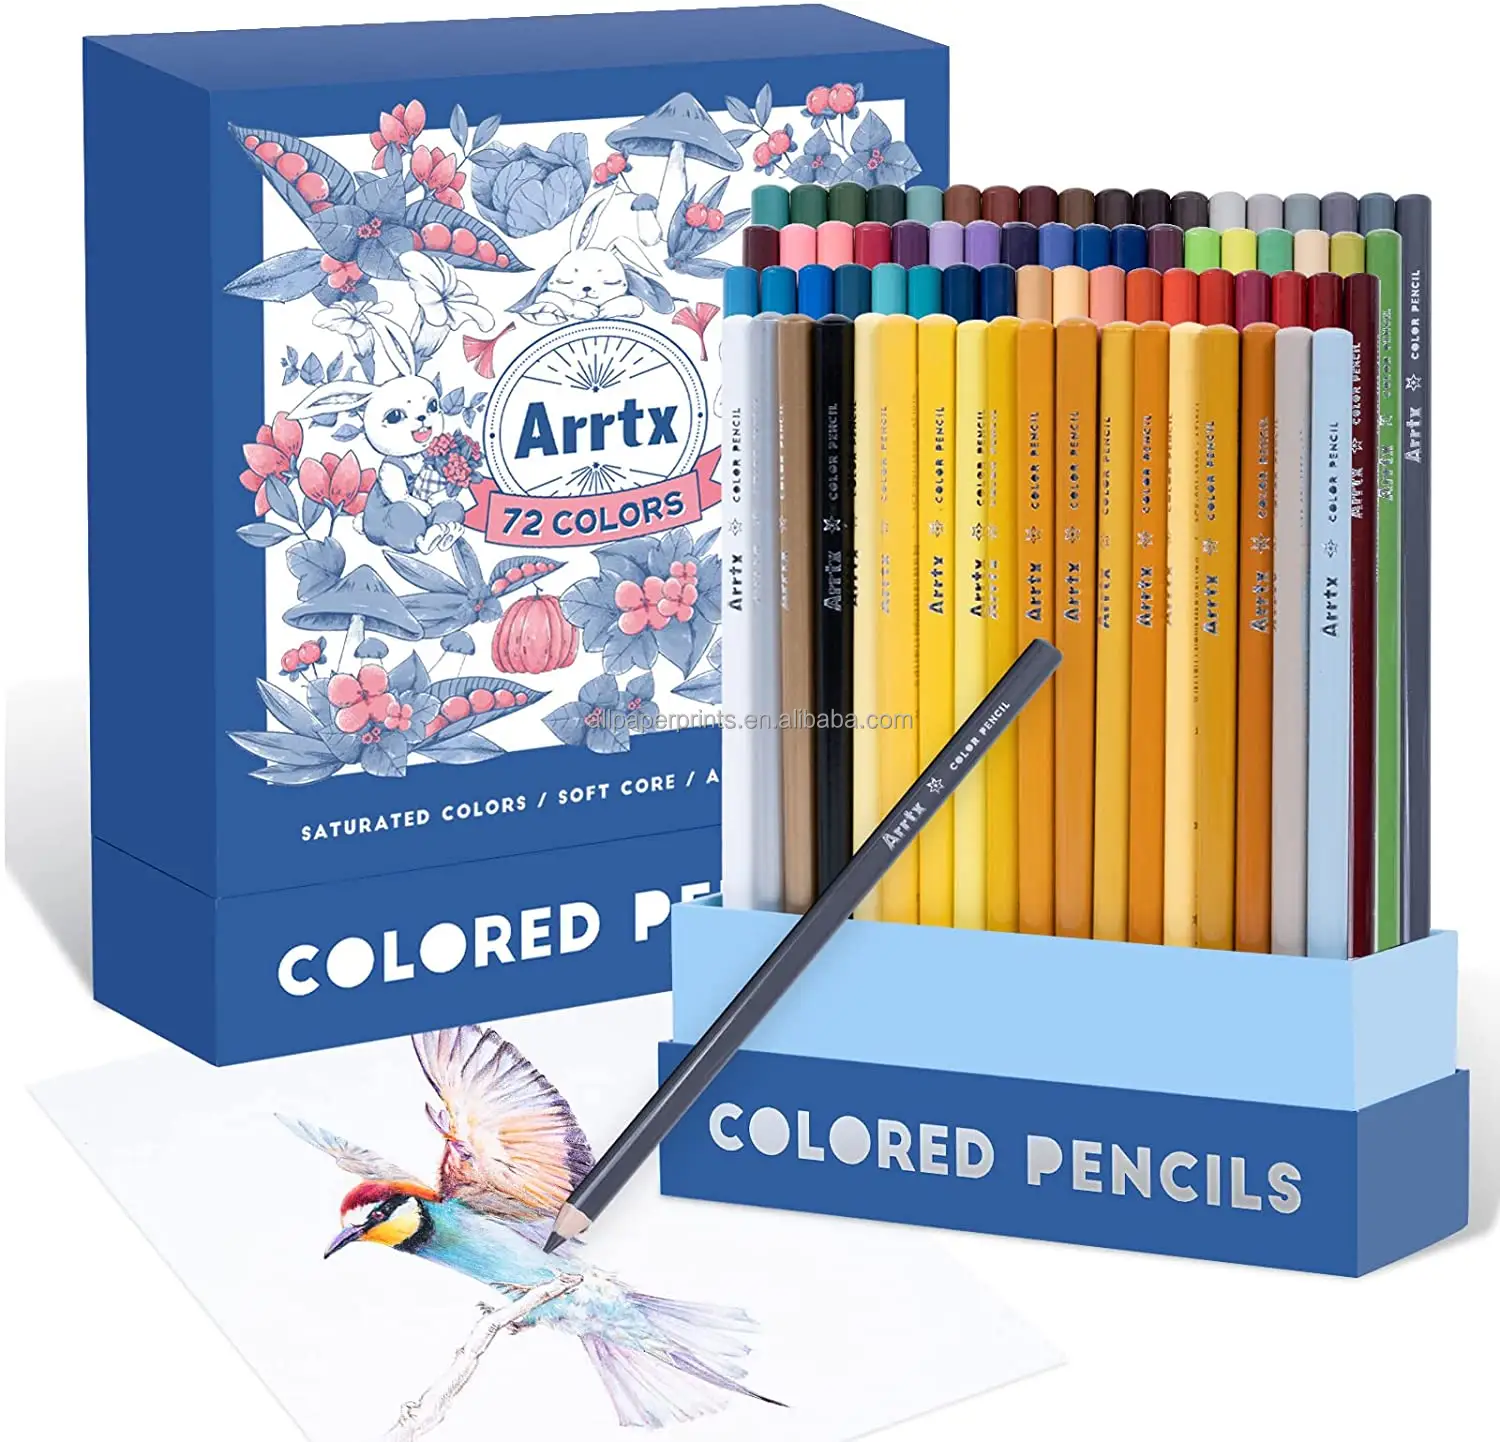 Premium 72 Colored Pencils Set, Soft Core Colored Leads with High lightfastness, Colored Pencils